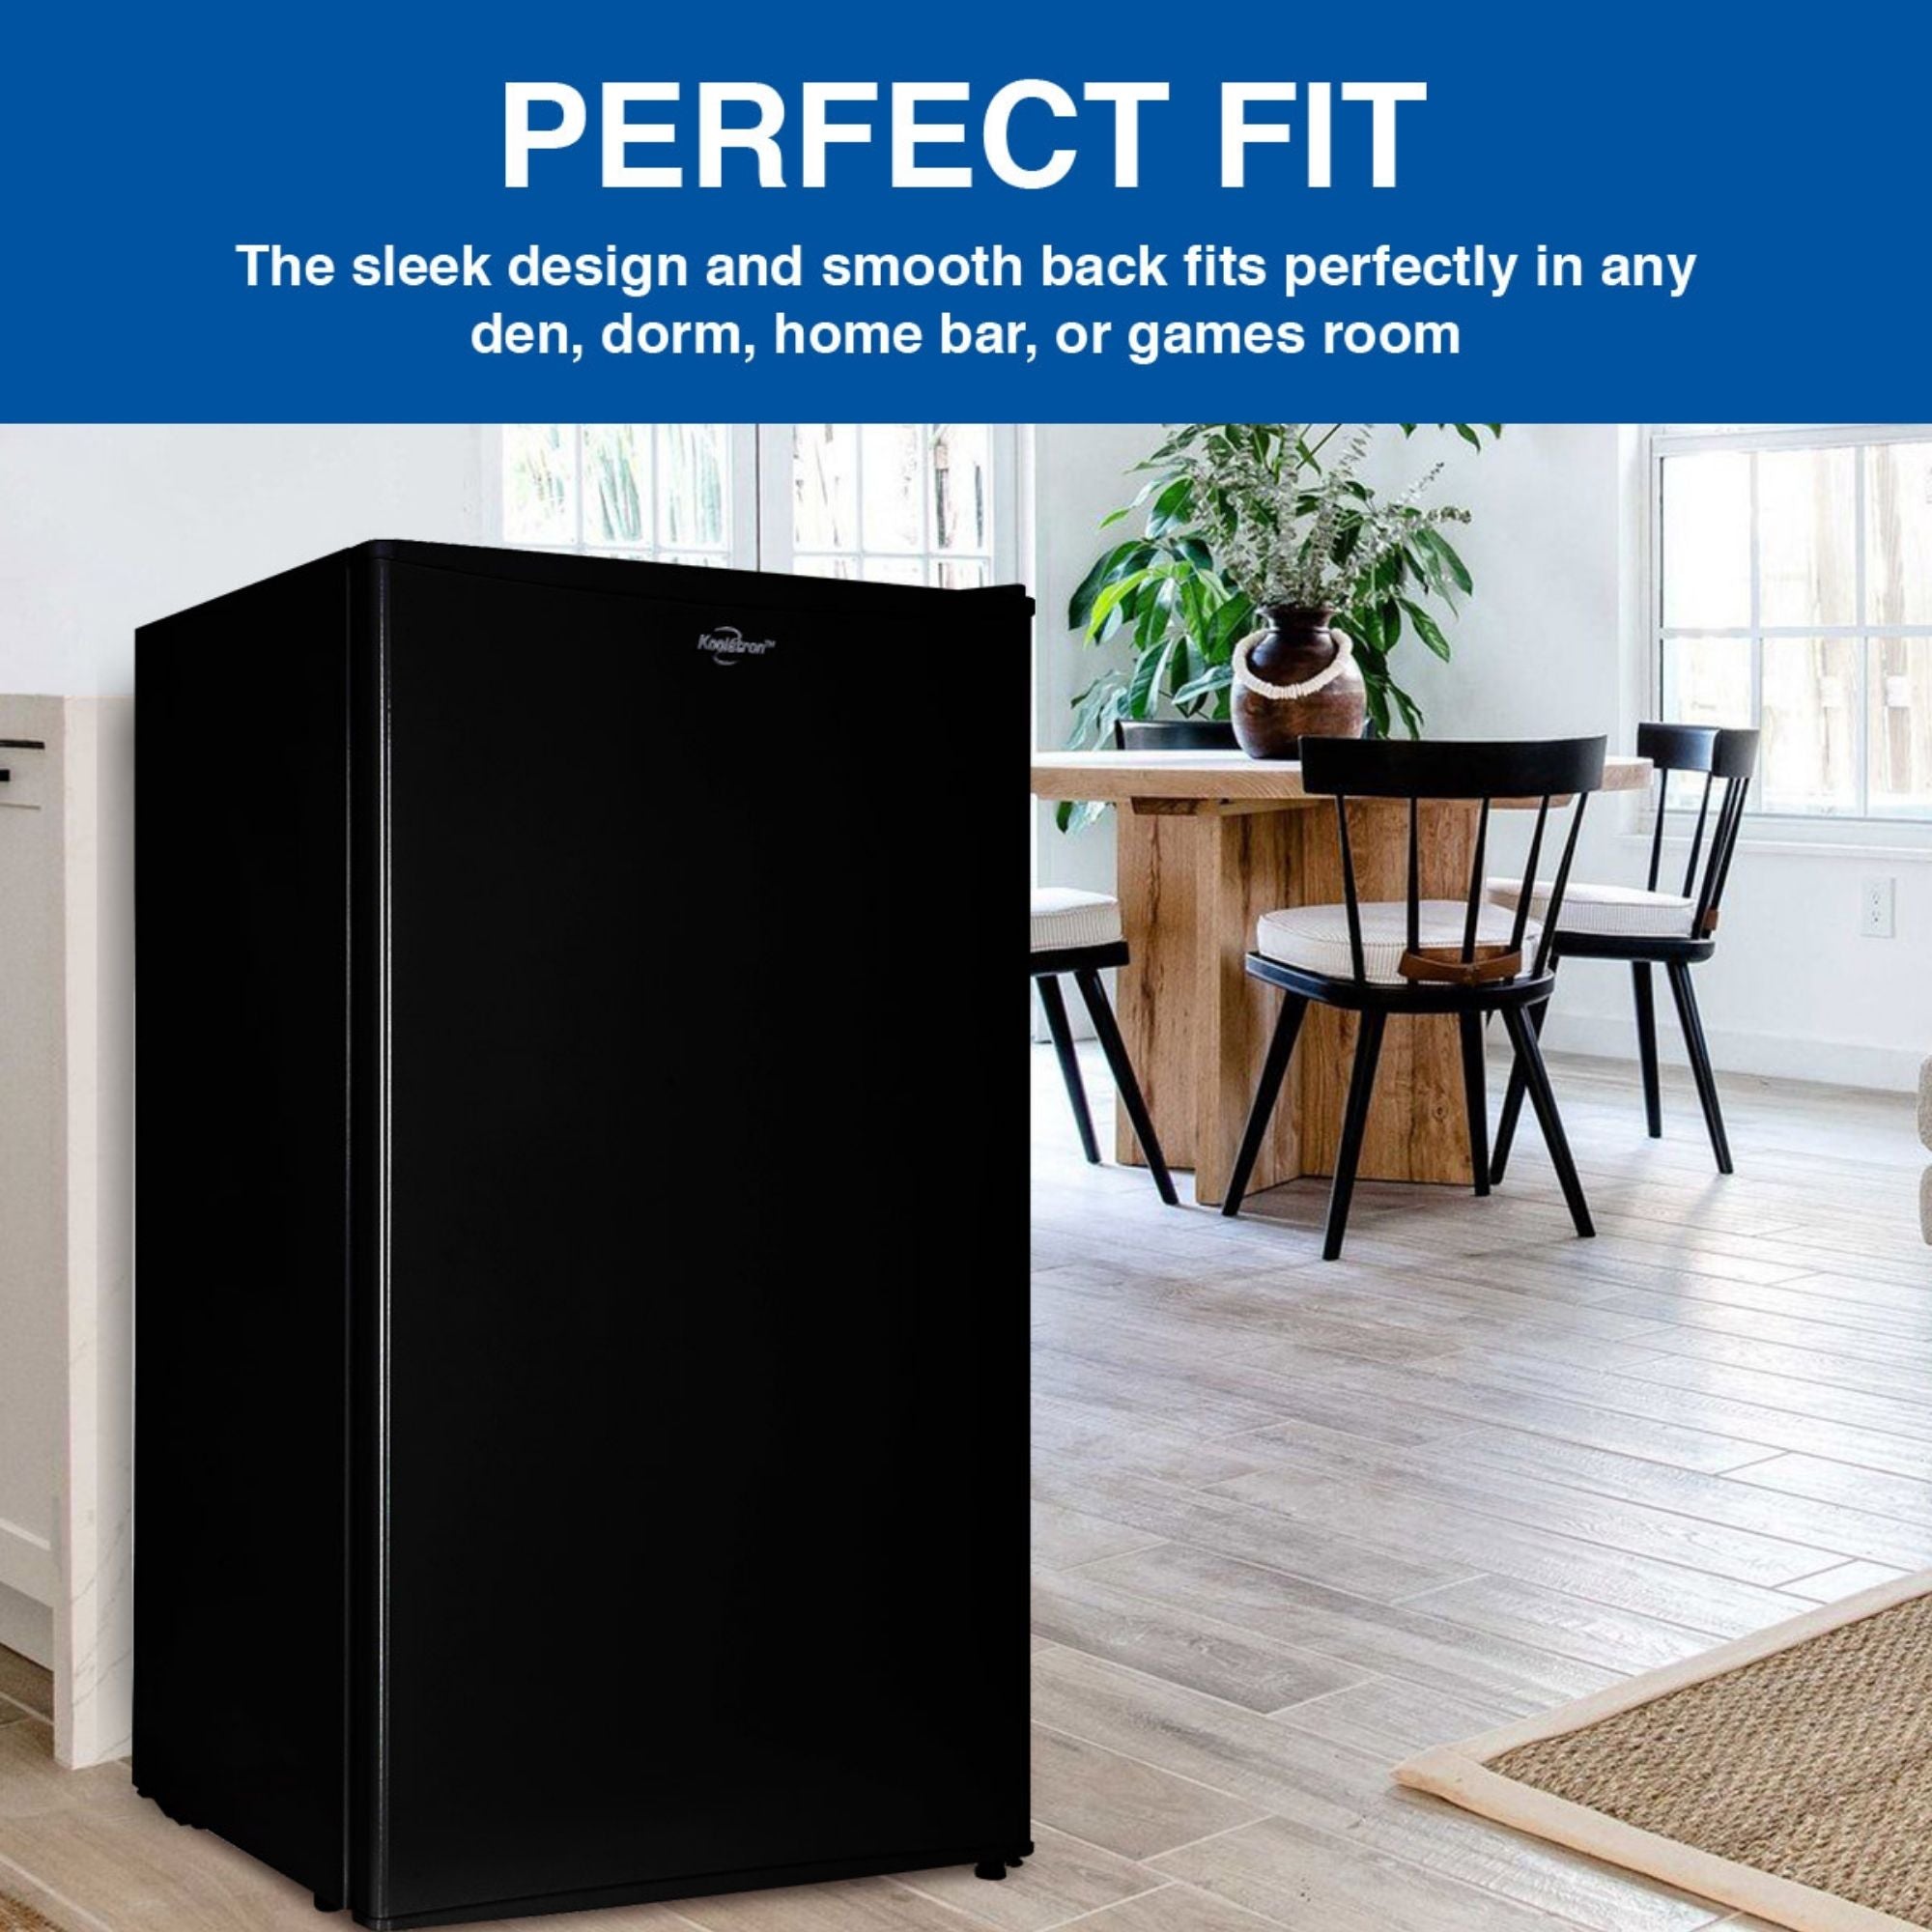 Lifestyle image of black compact fridge with freezer on a light-colored plank floor with a wooden table and chairs, two large windows, and a large potted plant in the background. Text above reads, "Perfect fit: The sleek design and smooth back fits perfectly in any den, dorm, home bar, or games room"